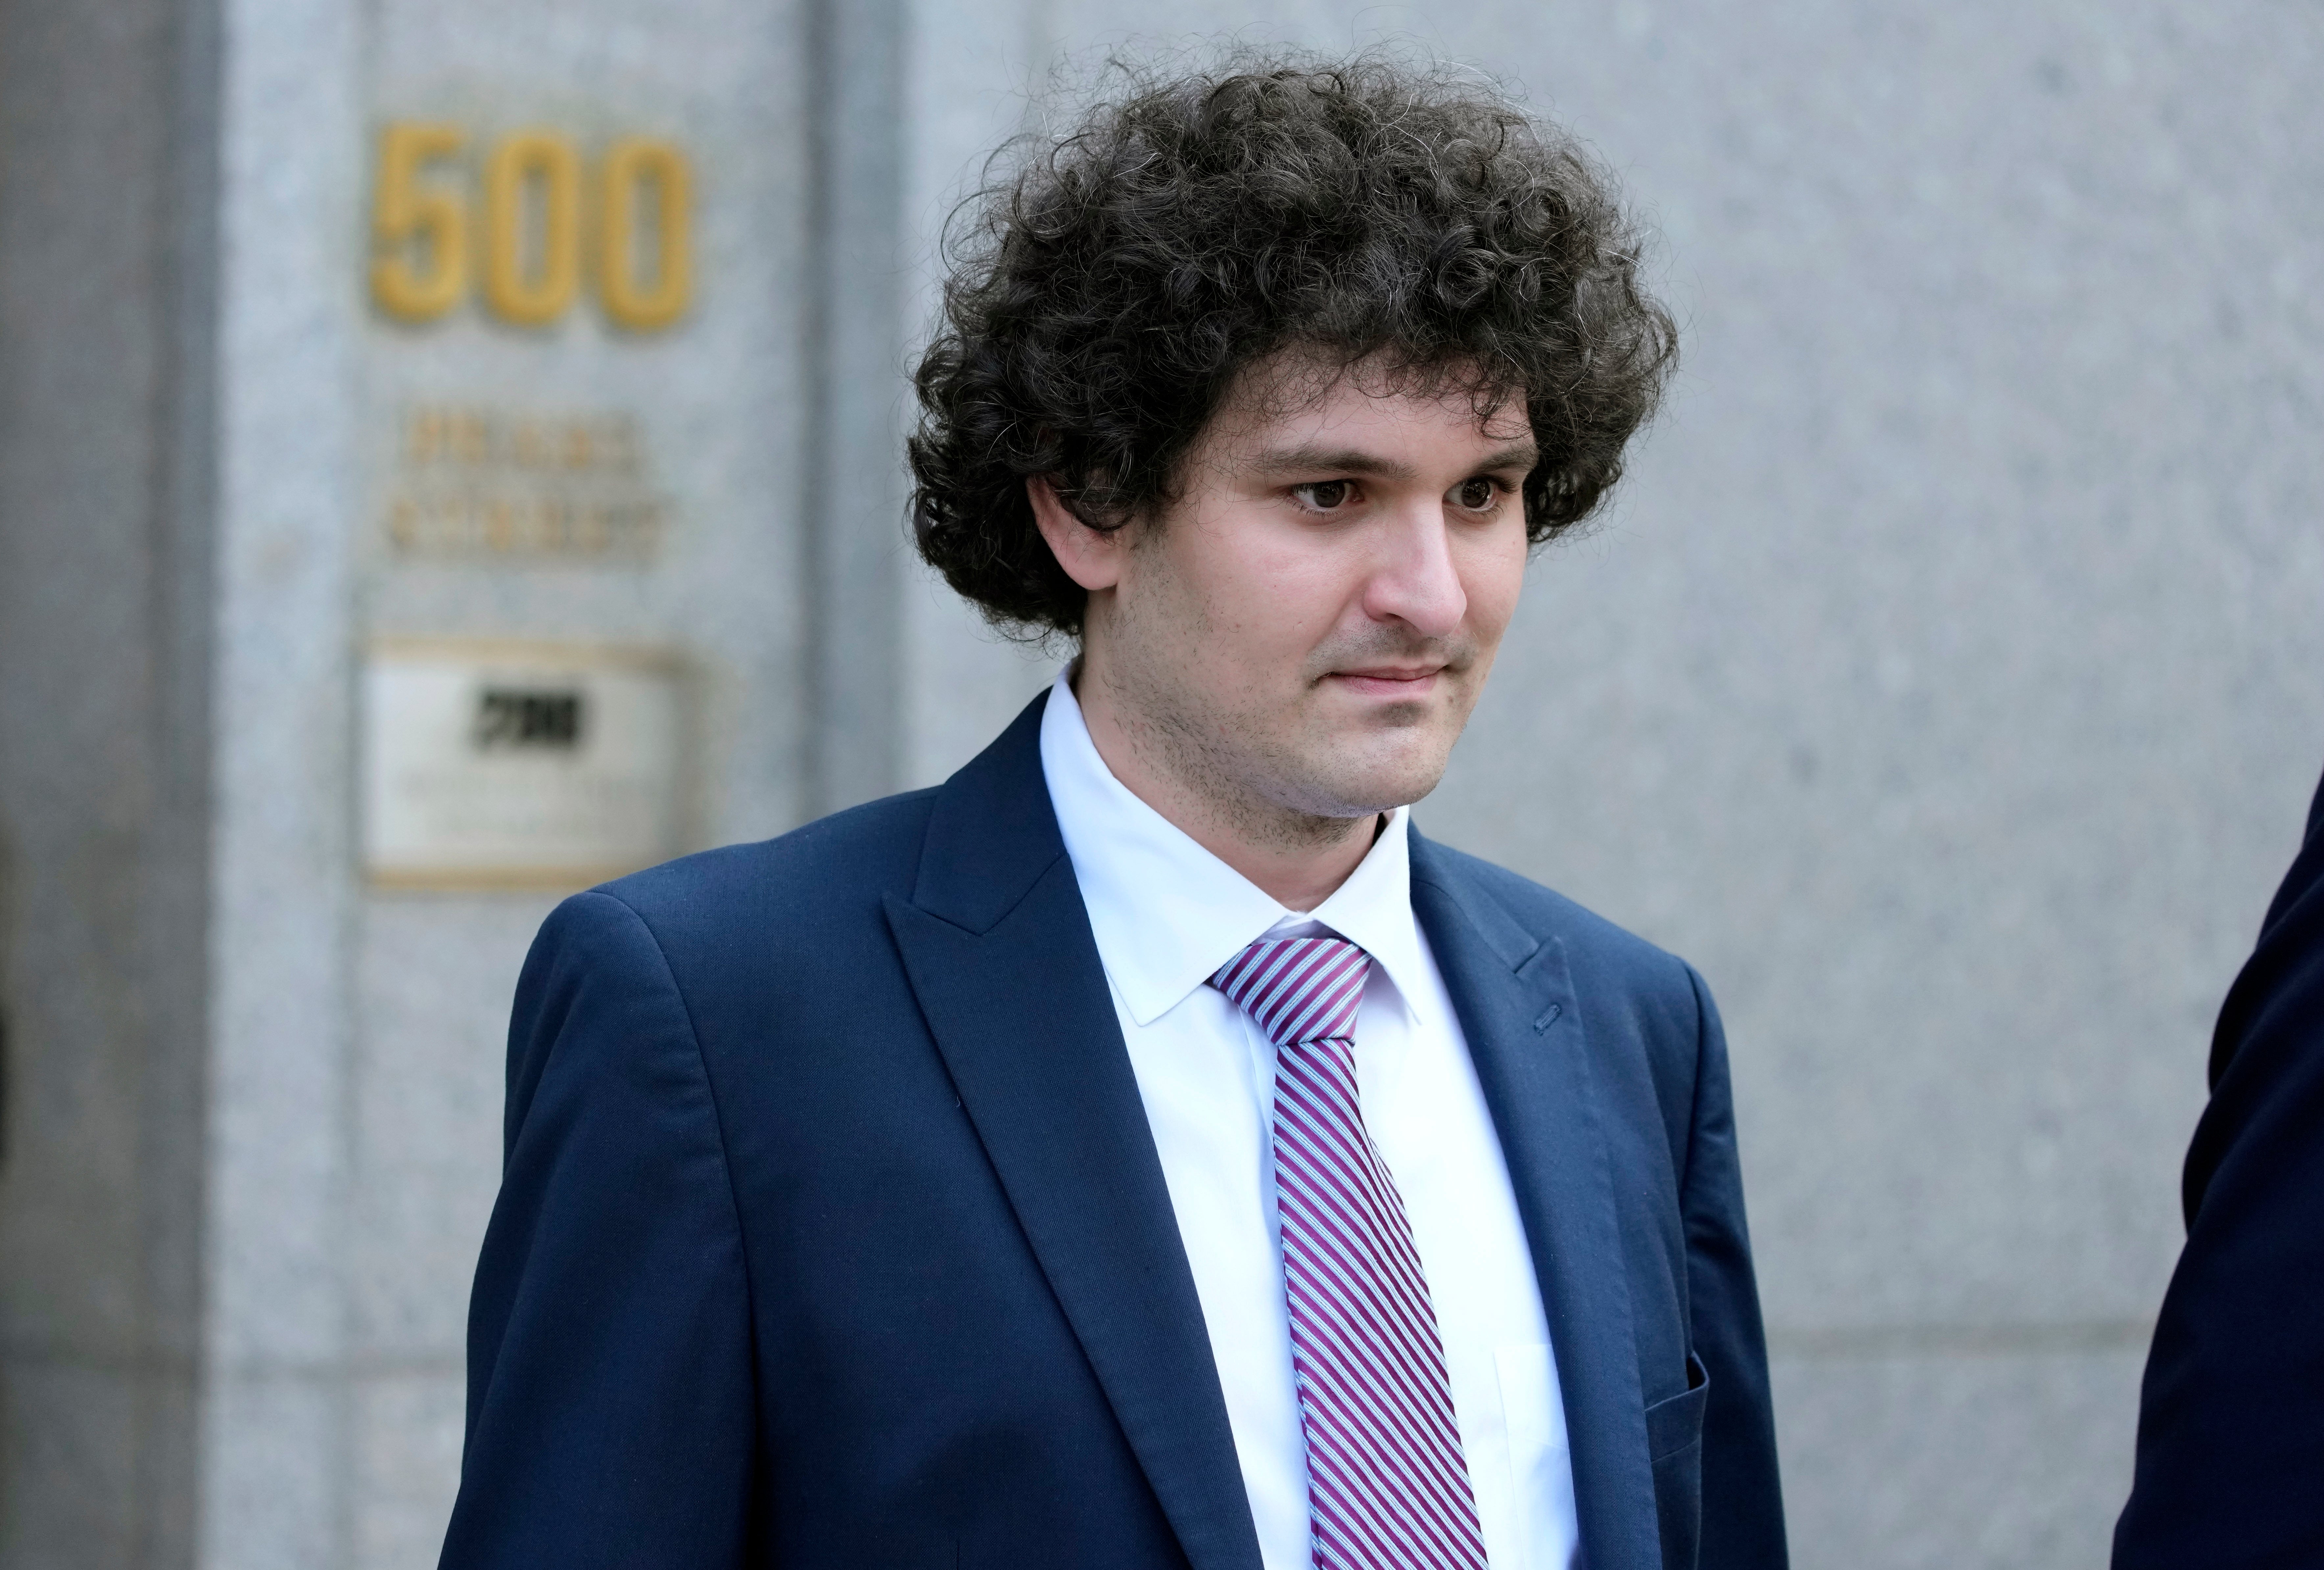 FTX founder Sam Bankman-Fried was sentenced to 25 years behind bars in March after being found guilty of two counts of fraud and five counts of conspiracy